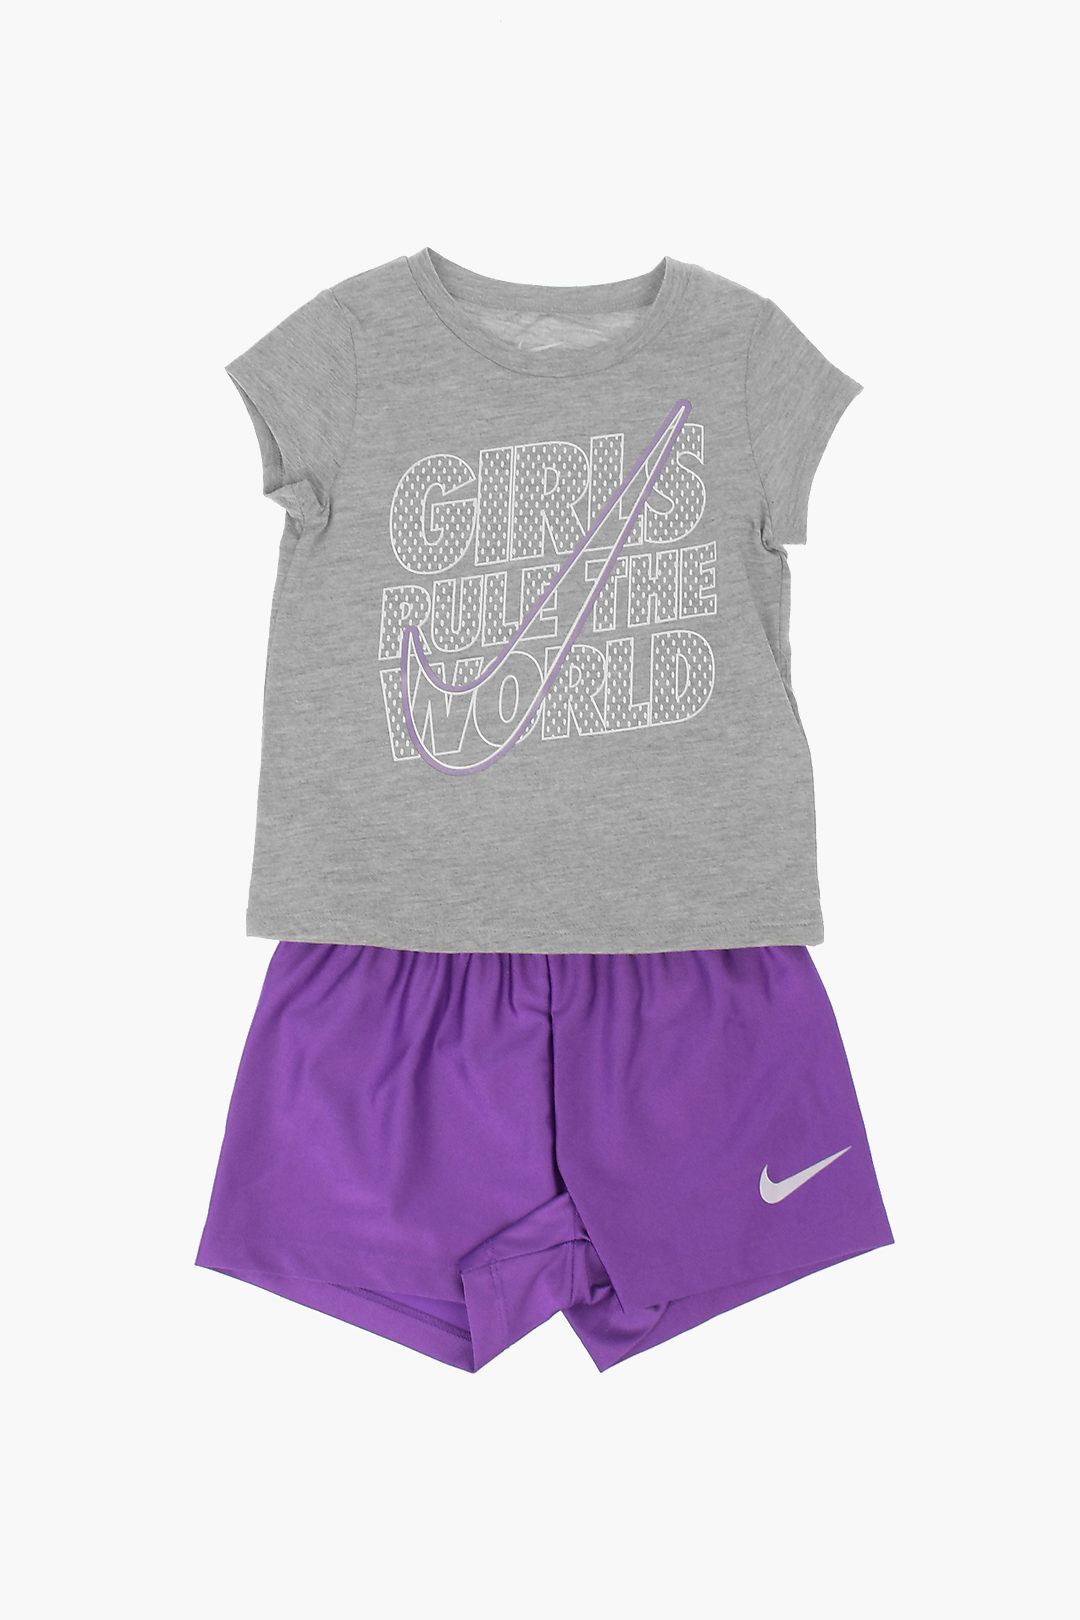 Nike T-Shirt & Shorts Set, Complete Outfit for Kids